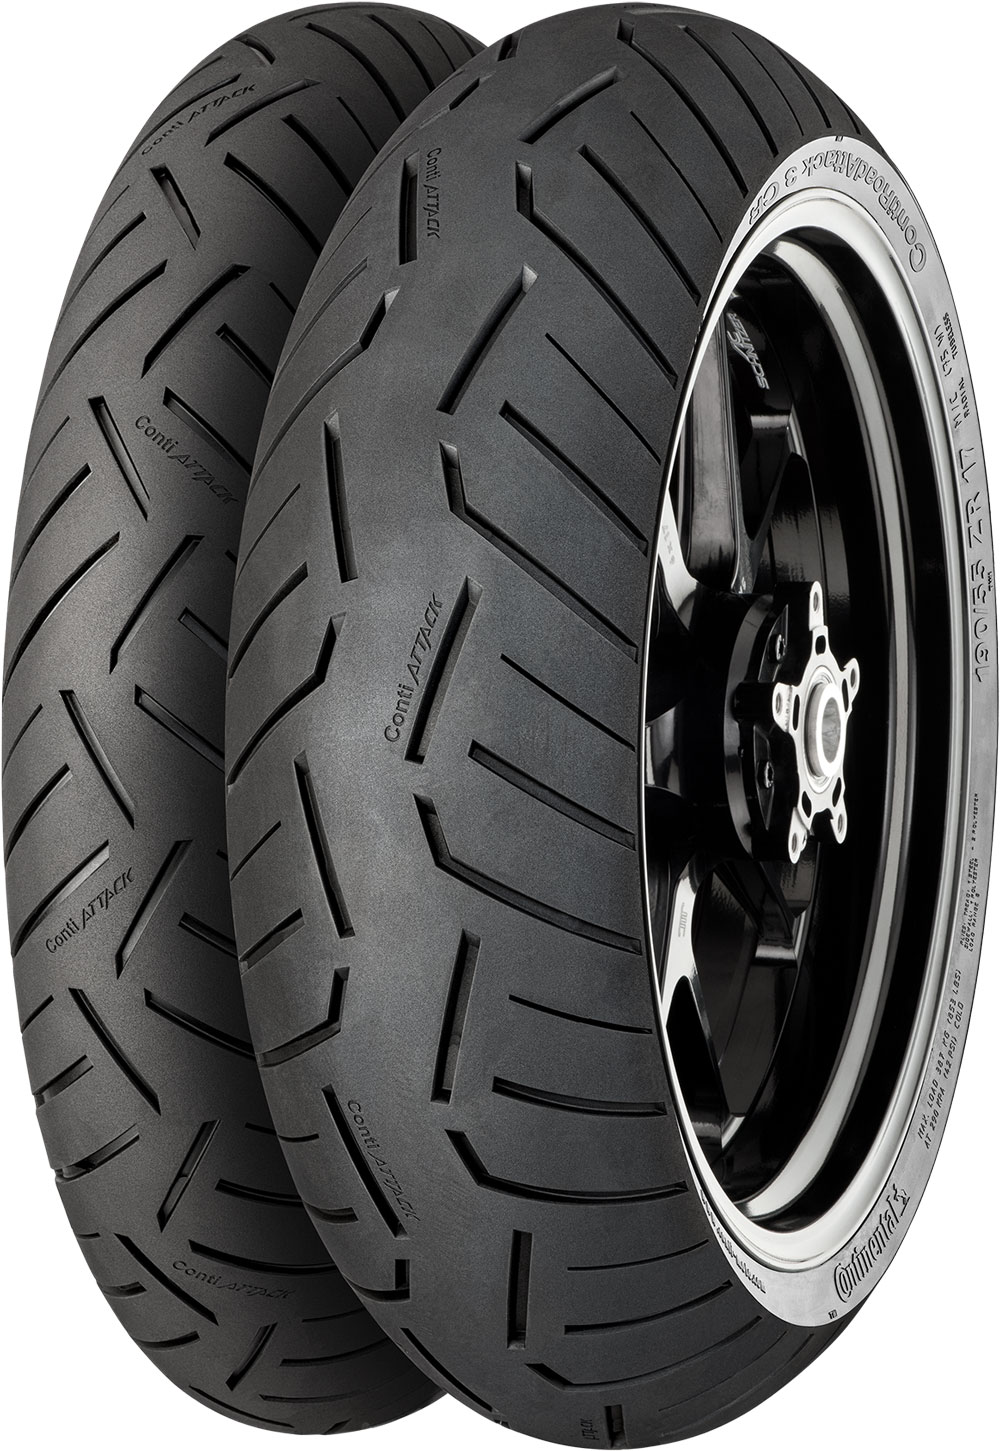 product_type-moto_tires CONTINENTAL RDATTCK3CR 130/80 R18 66V